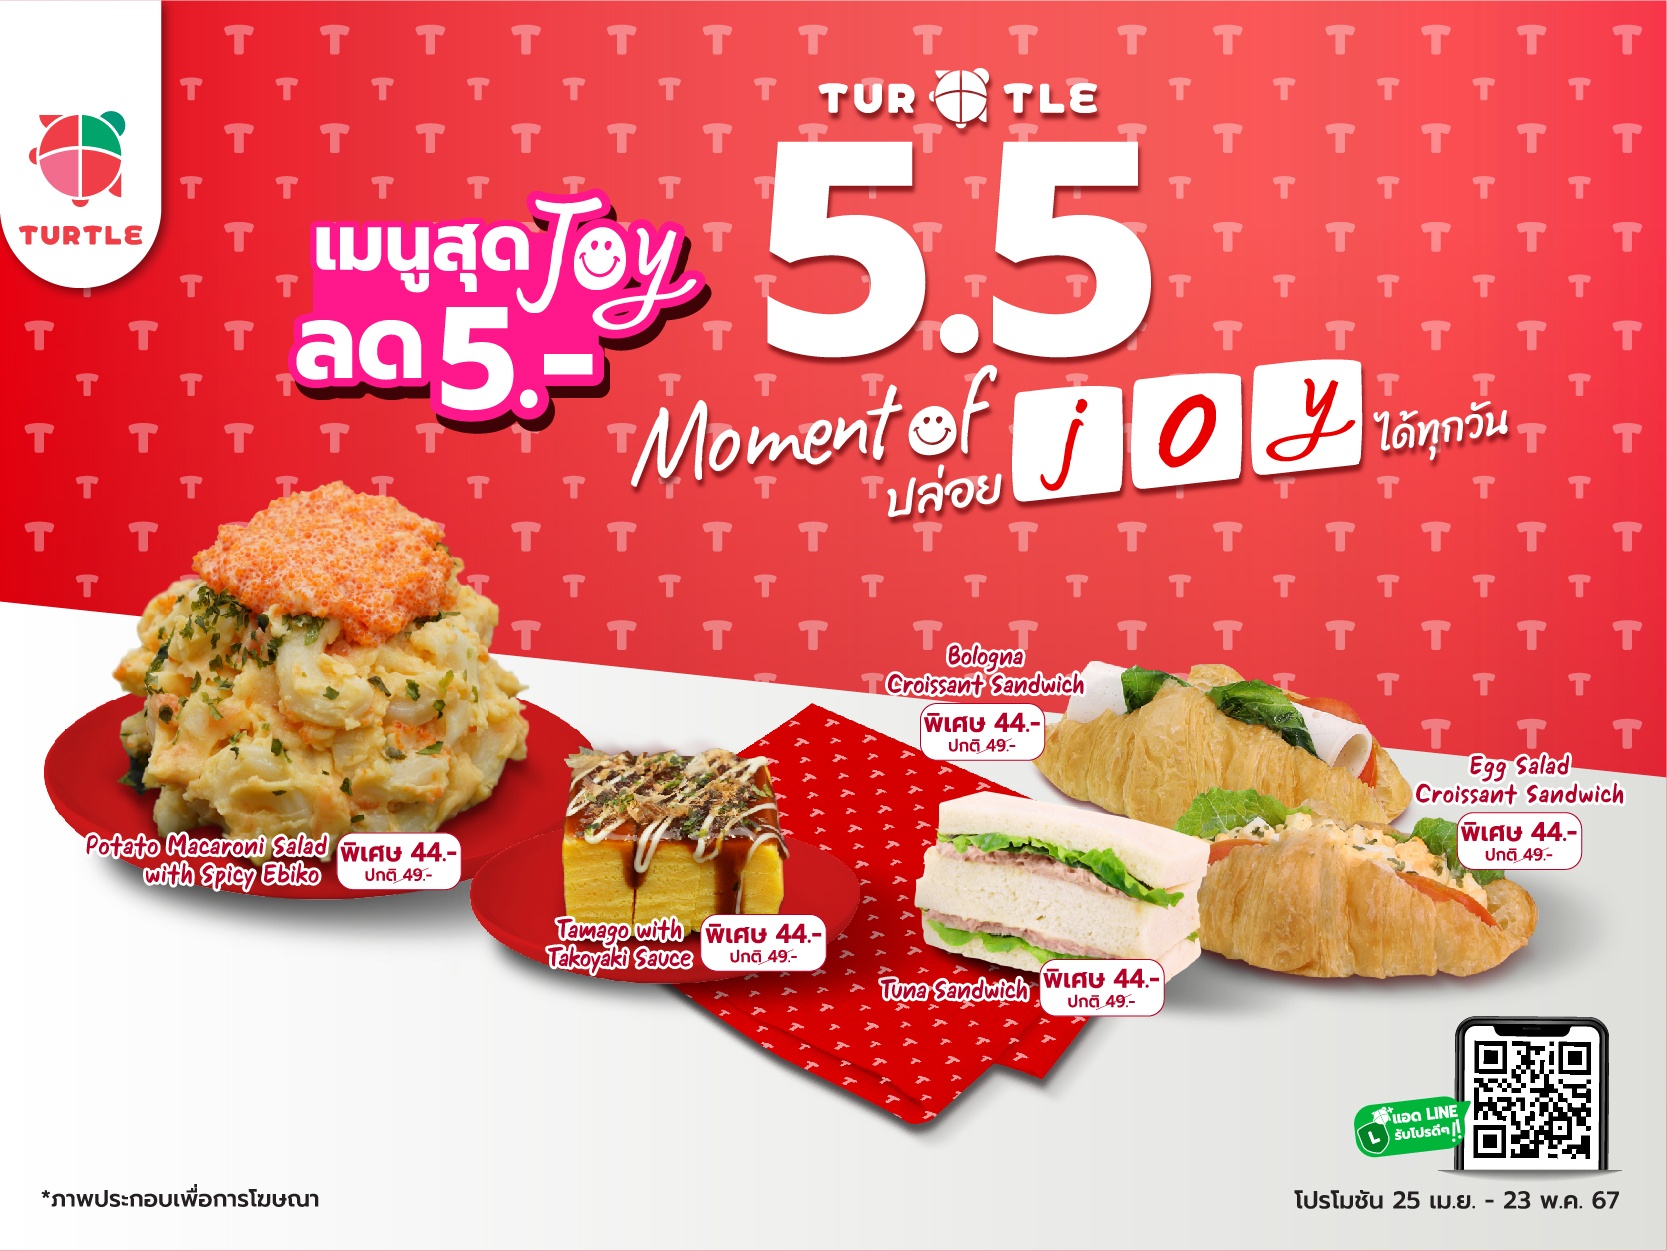 5.5 Moment of Joy: Indulge in our ultimate Joy menu, satisfying and worth every bite, now reduced by 5 baht per item